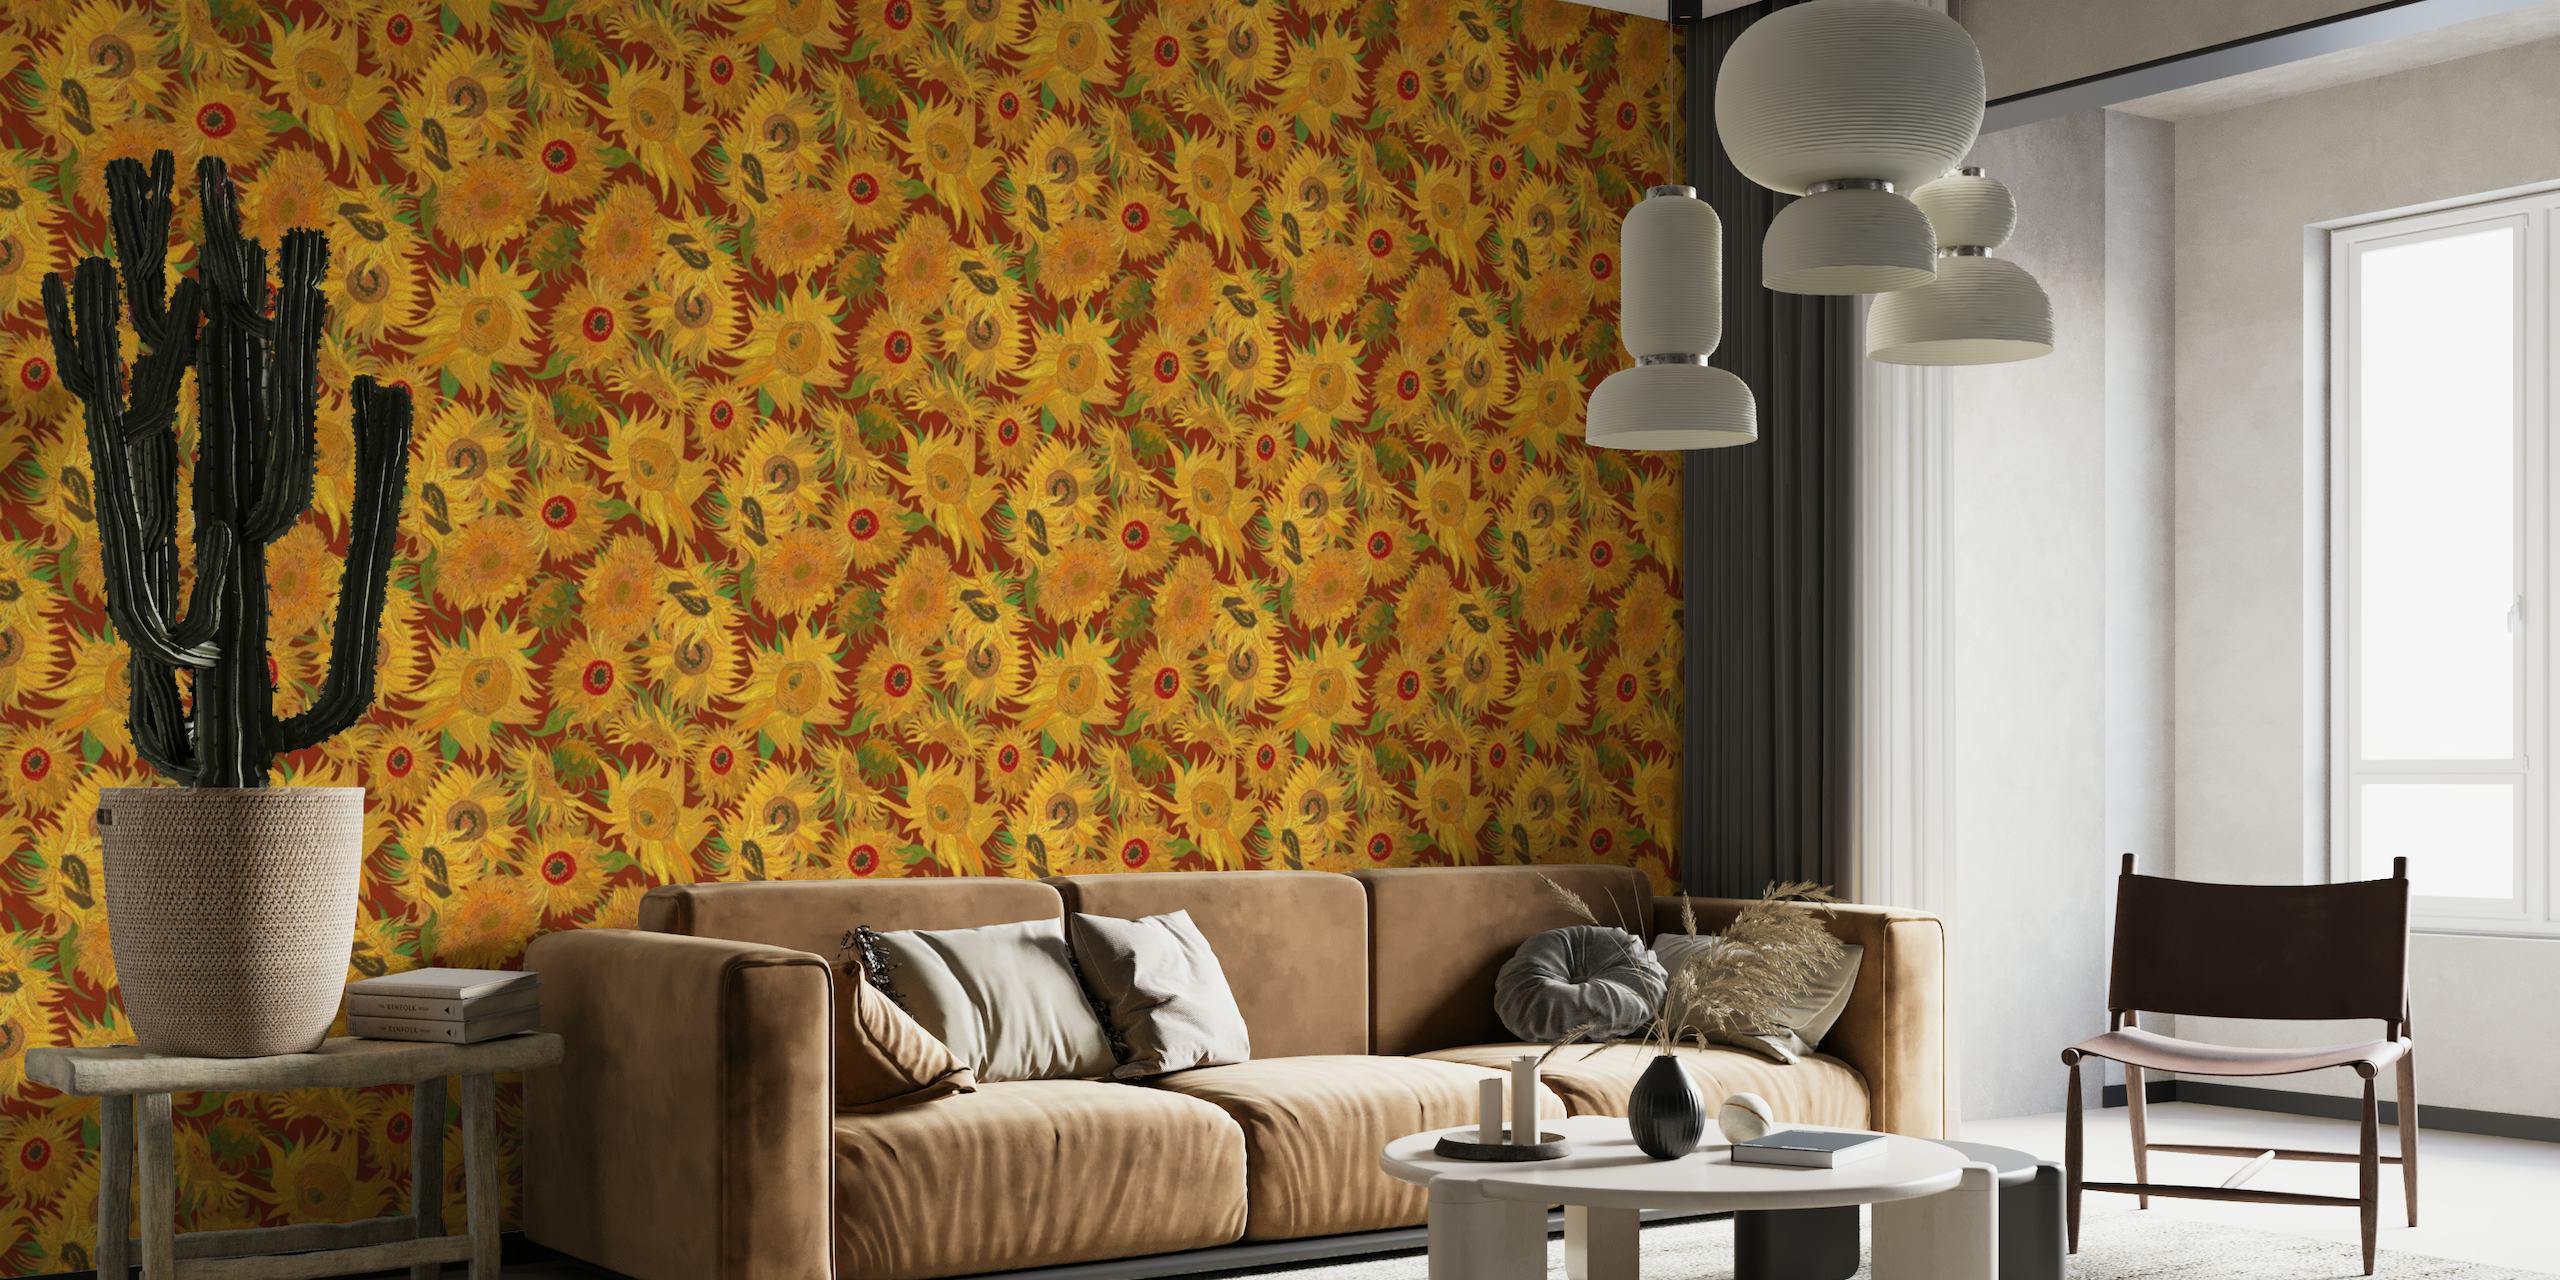 Van Gogh Sunflowers Pattern in yellow, green and burgundy red tapetit